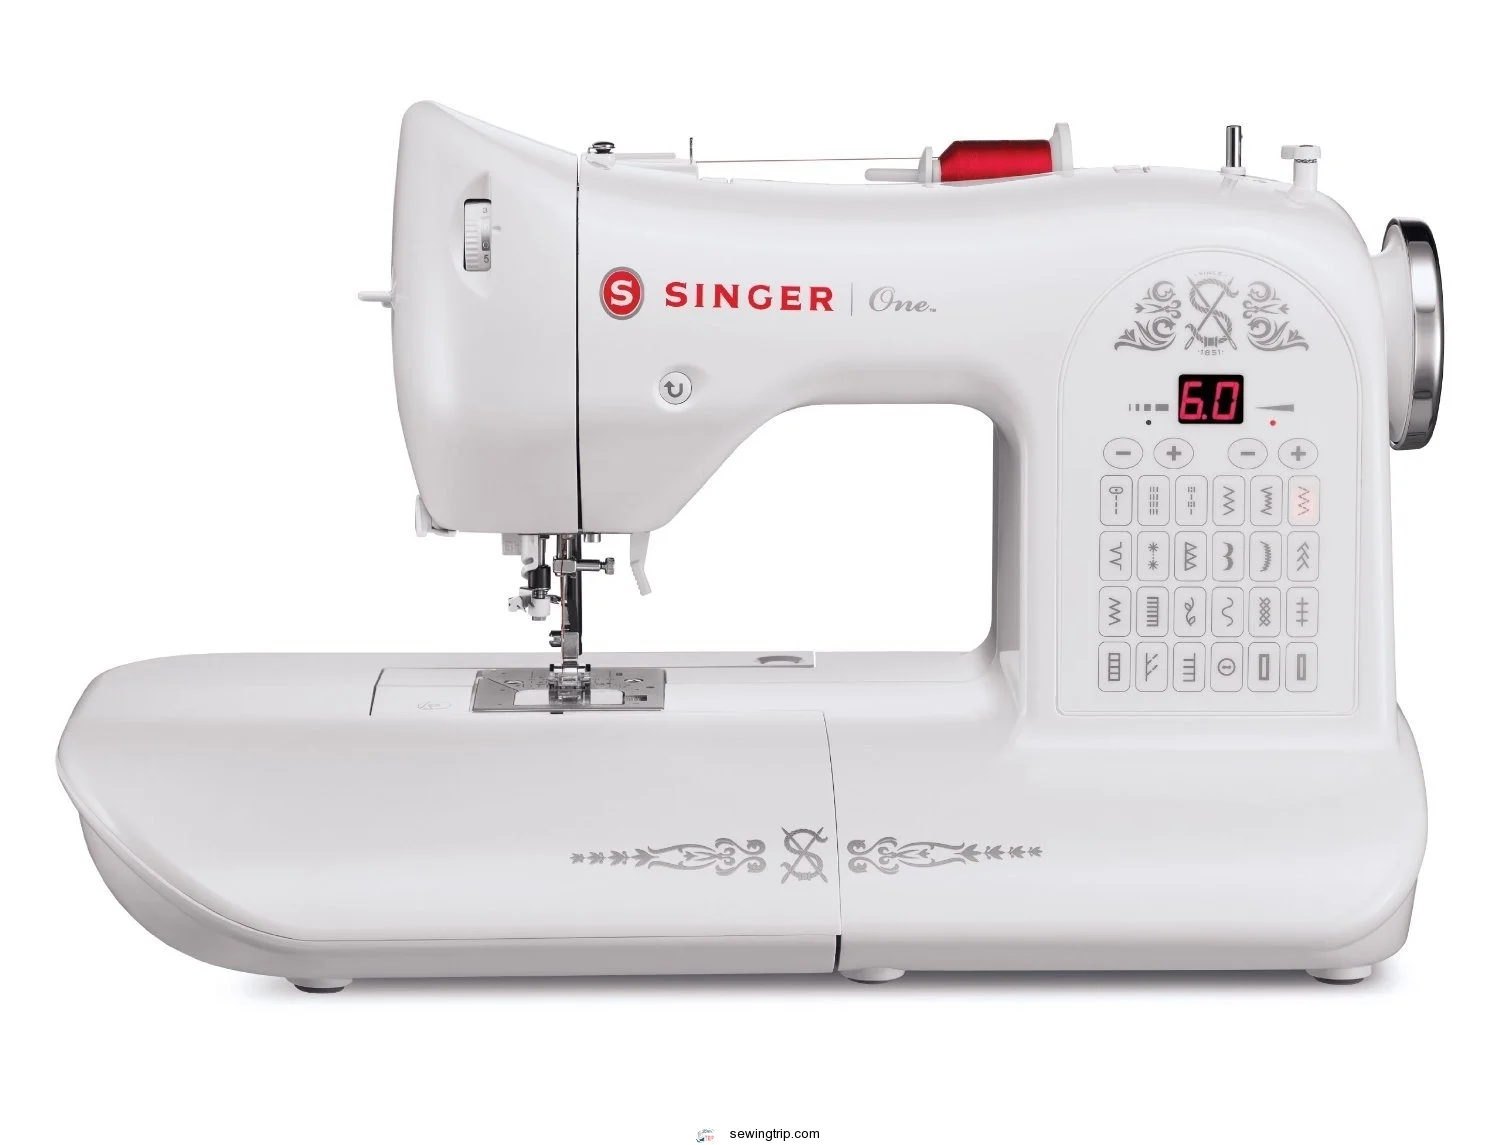 singer one review